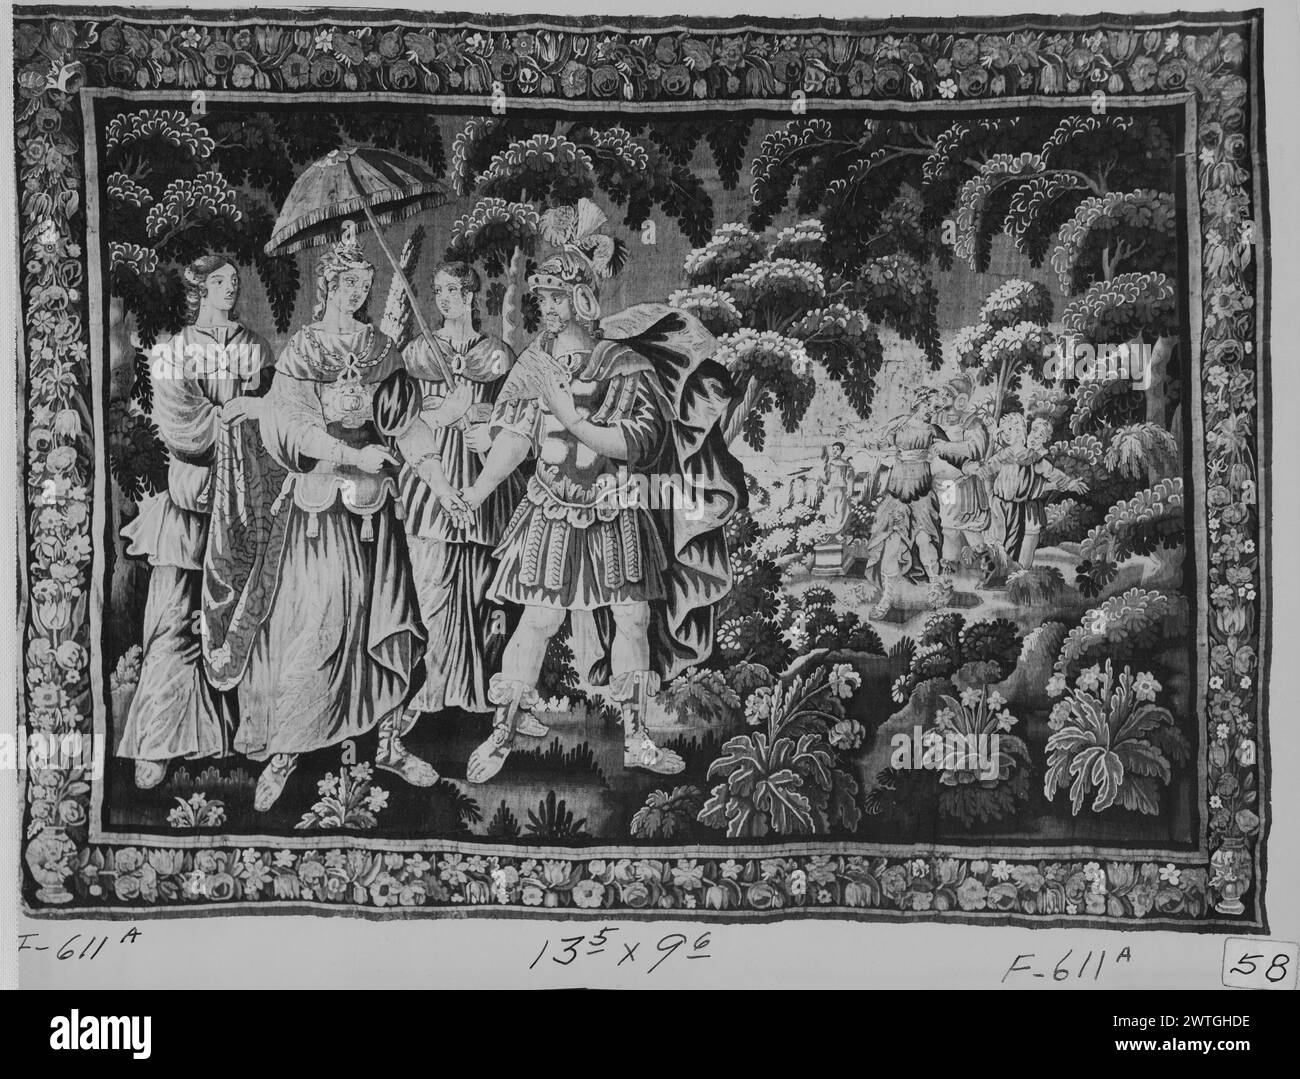 Wedding scene . unknown c. 1670 Tapestry Dimensions: H 9'6' x W 13'5' Tapestry Materials/Techniques: unknown Culture: French Weaving Center: Aubusson Ownership History: French & Co. Man dressed as Roman soldier with plumed helmet takes hand of crowned woman shaded by umbrella held by 1 of 2 attendants; in landscape setting with background figures (BRD) garland emanating from vases at base of side borders French & Co. stock sheet missing from archive, F-611-a Related Works: Panels in set, 0244208, 0209548, 0244279 Stock Photo